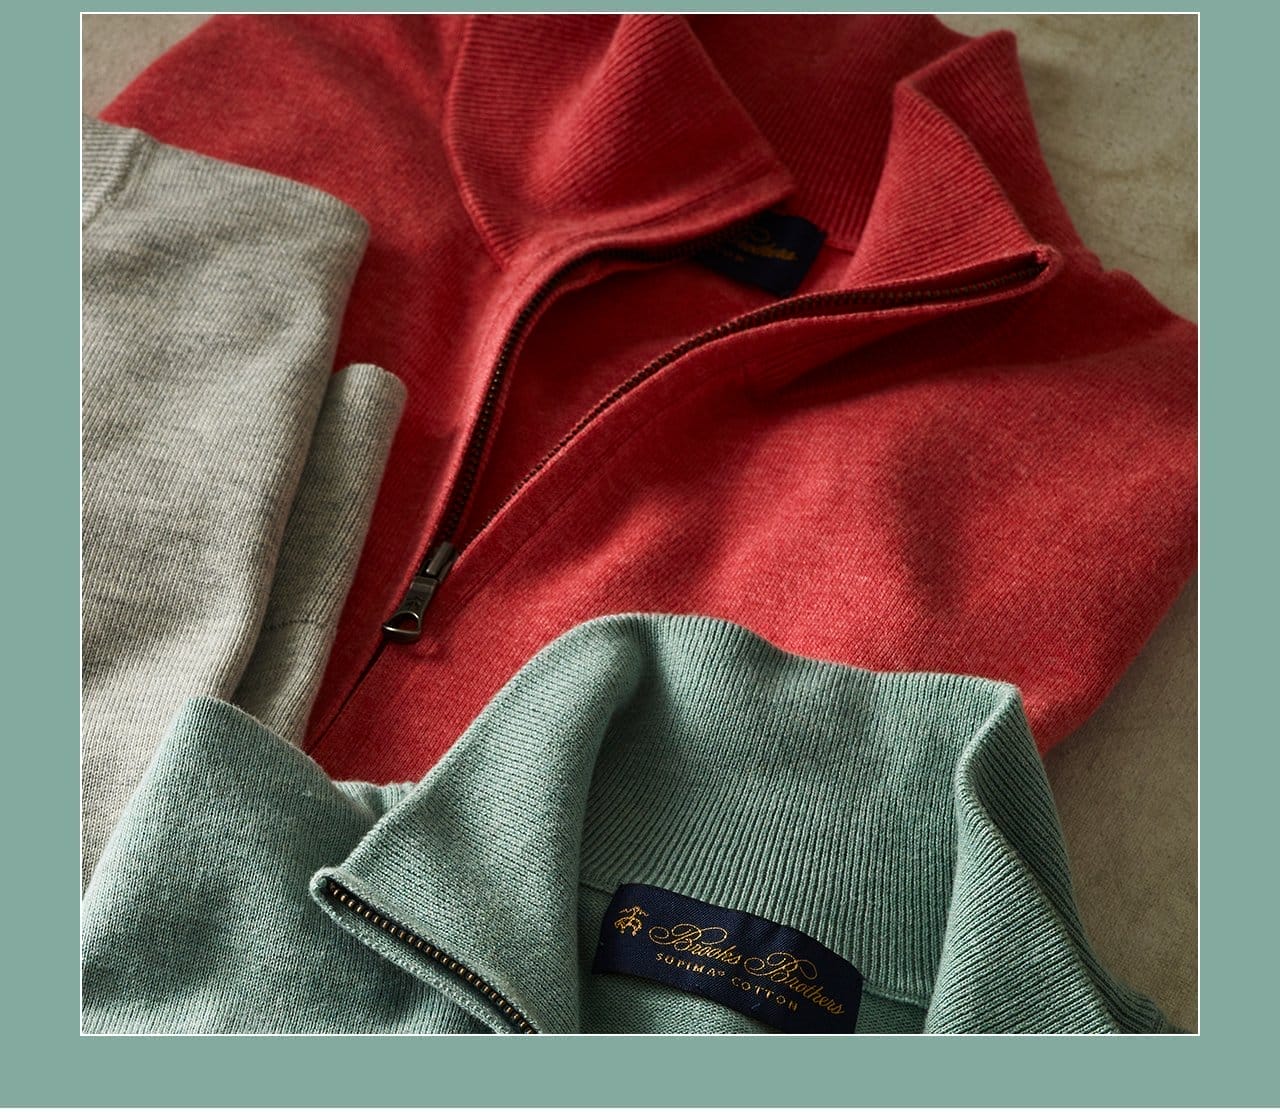 Rare Form Our unrivaled Supima cotton sweaters: the world's most exclusive long-staple cotton, grown in the USA. Feel them for yourself.